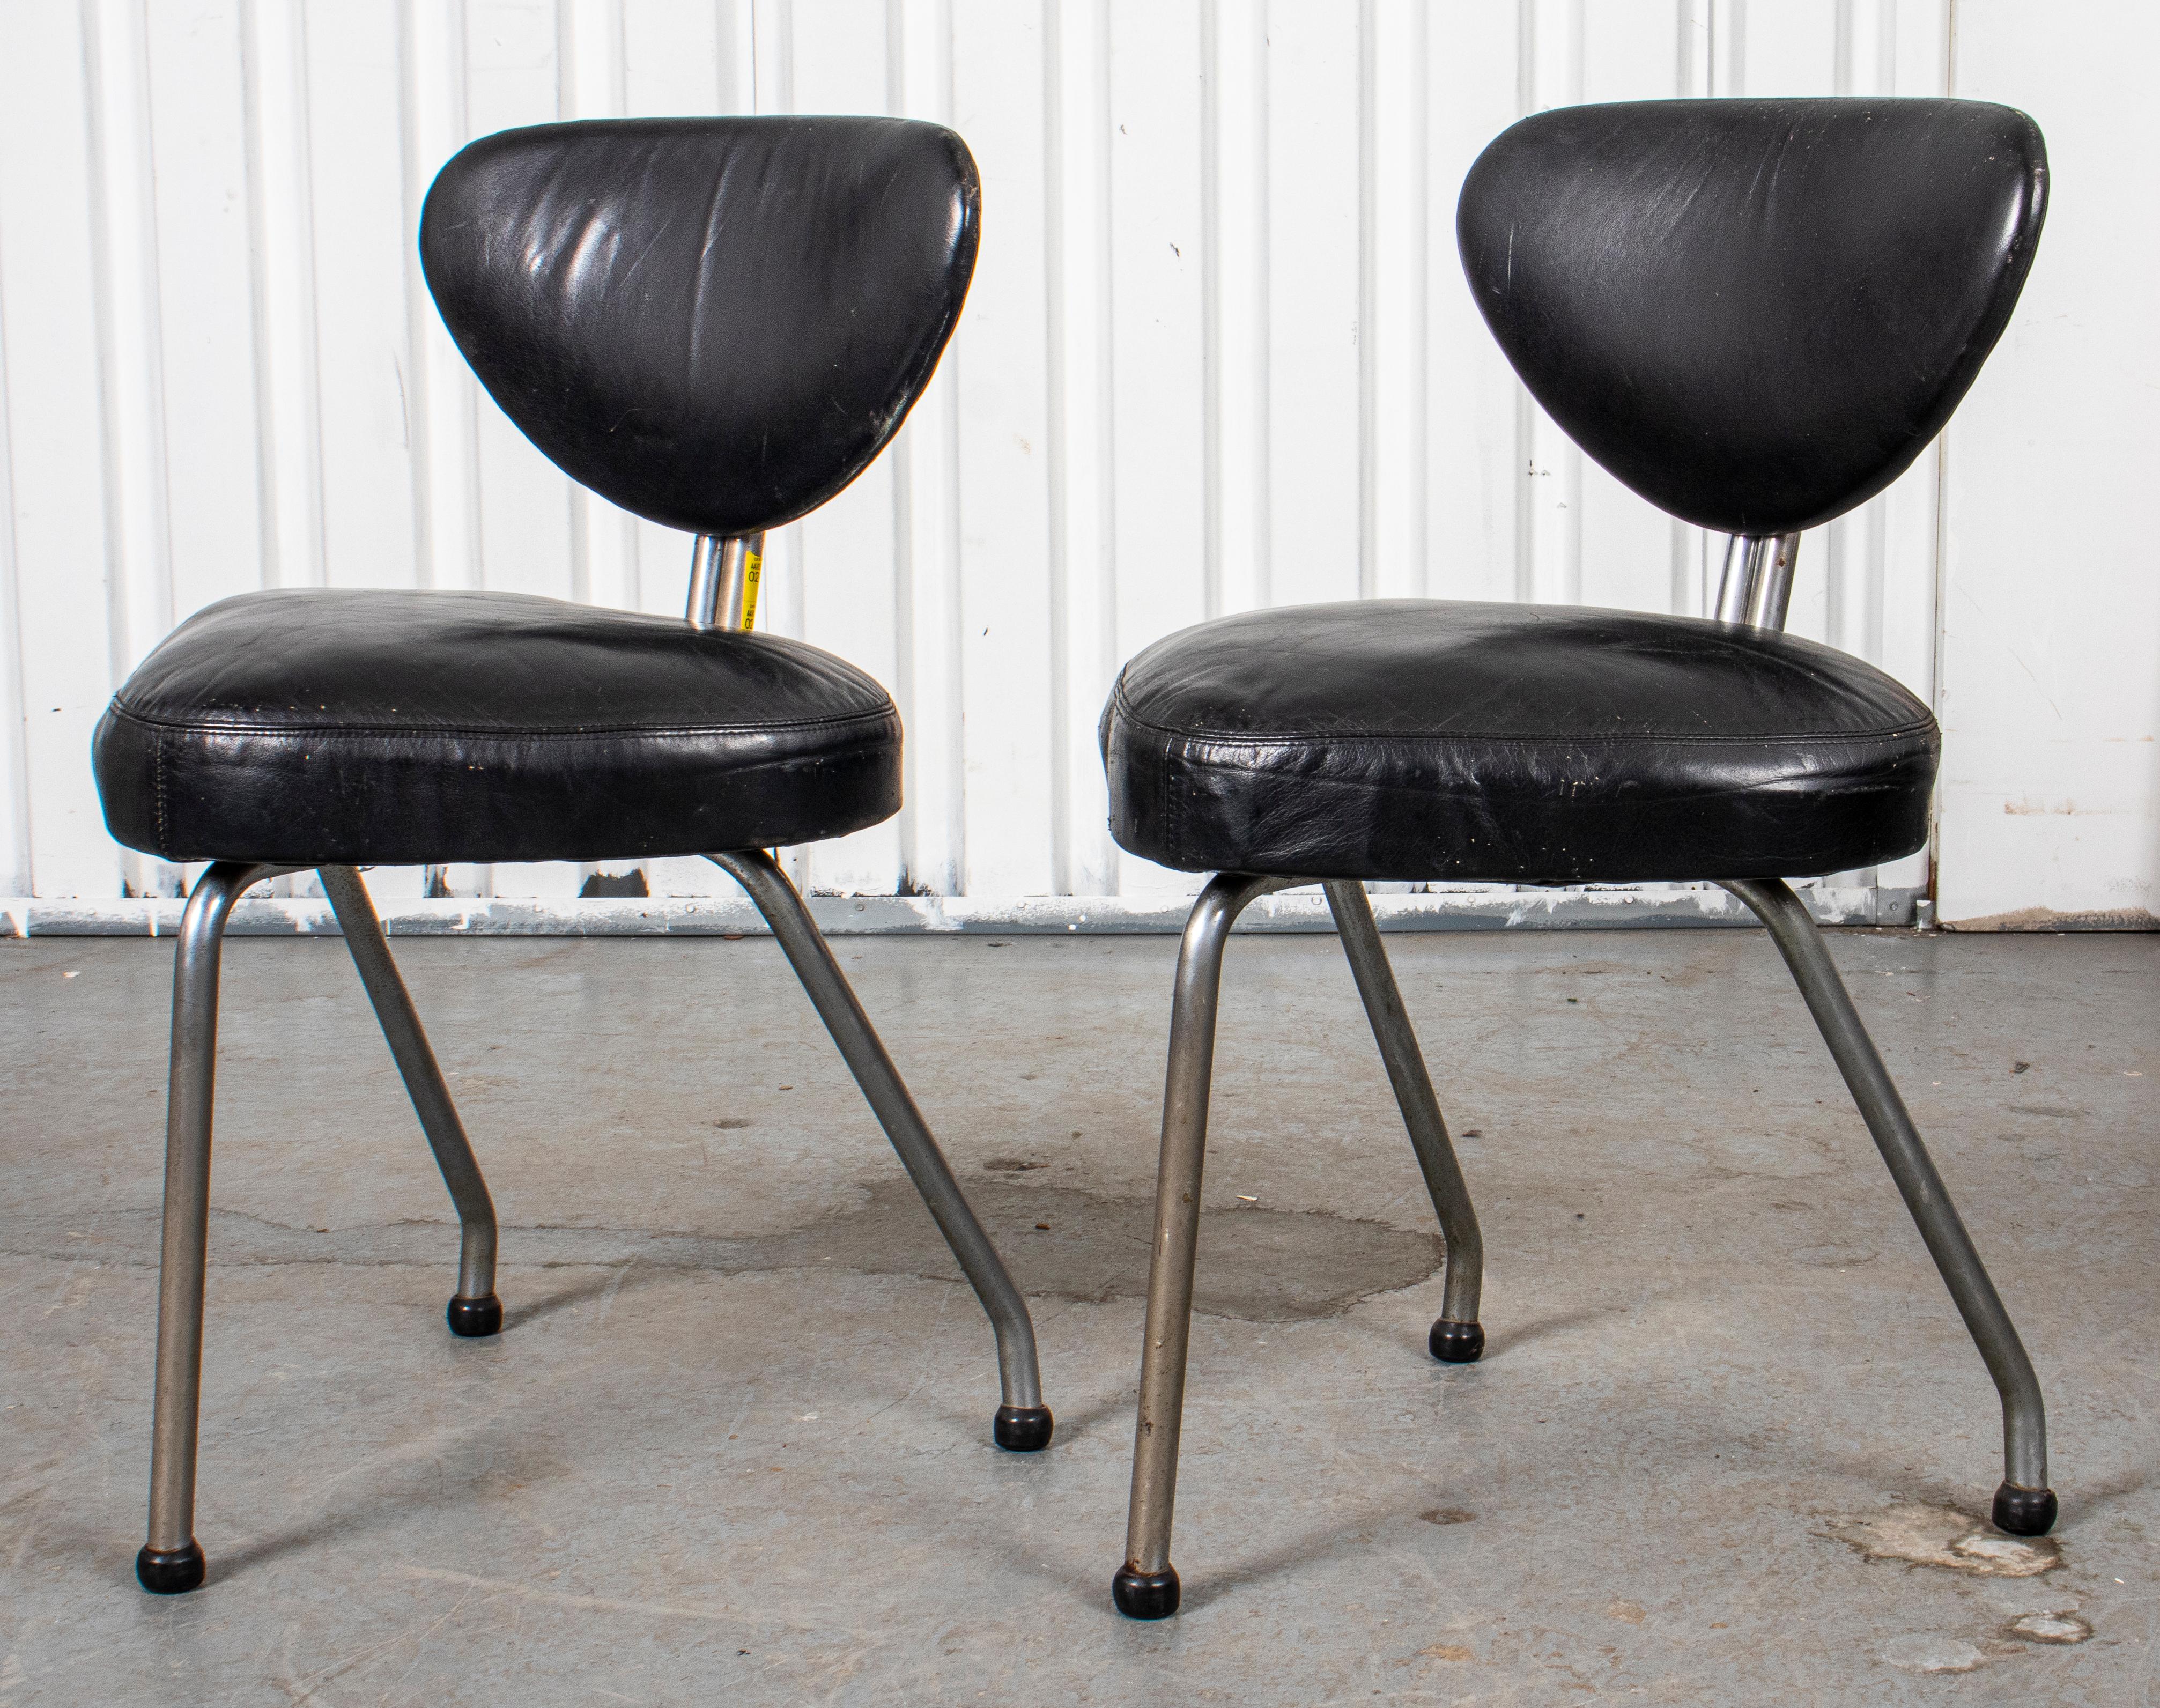 20th Century Modern Leather Upholstered Side Chairs, Pair